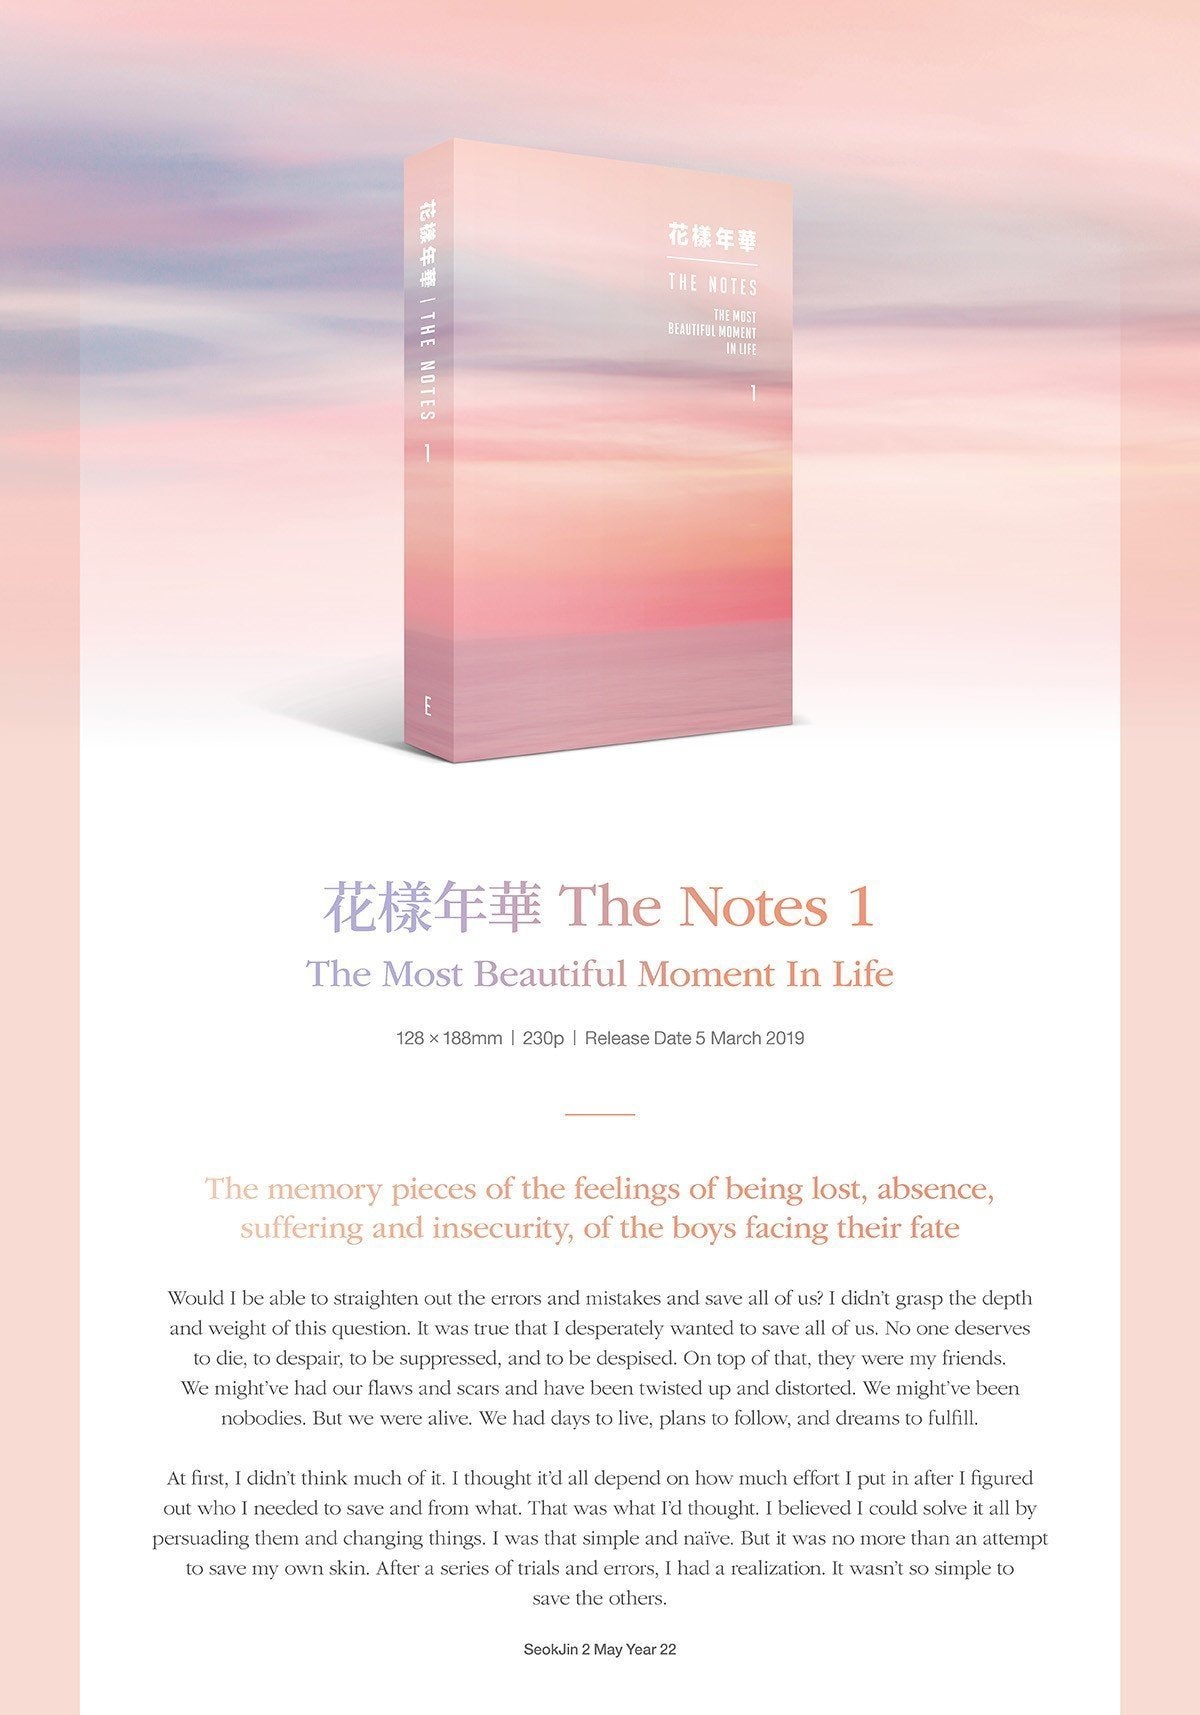 BTS Vol. 3 - The Most Beautiful Moment in Life The Notes 1 (English Version)